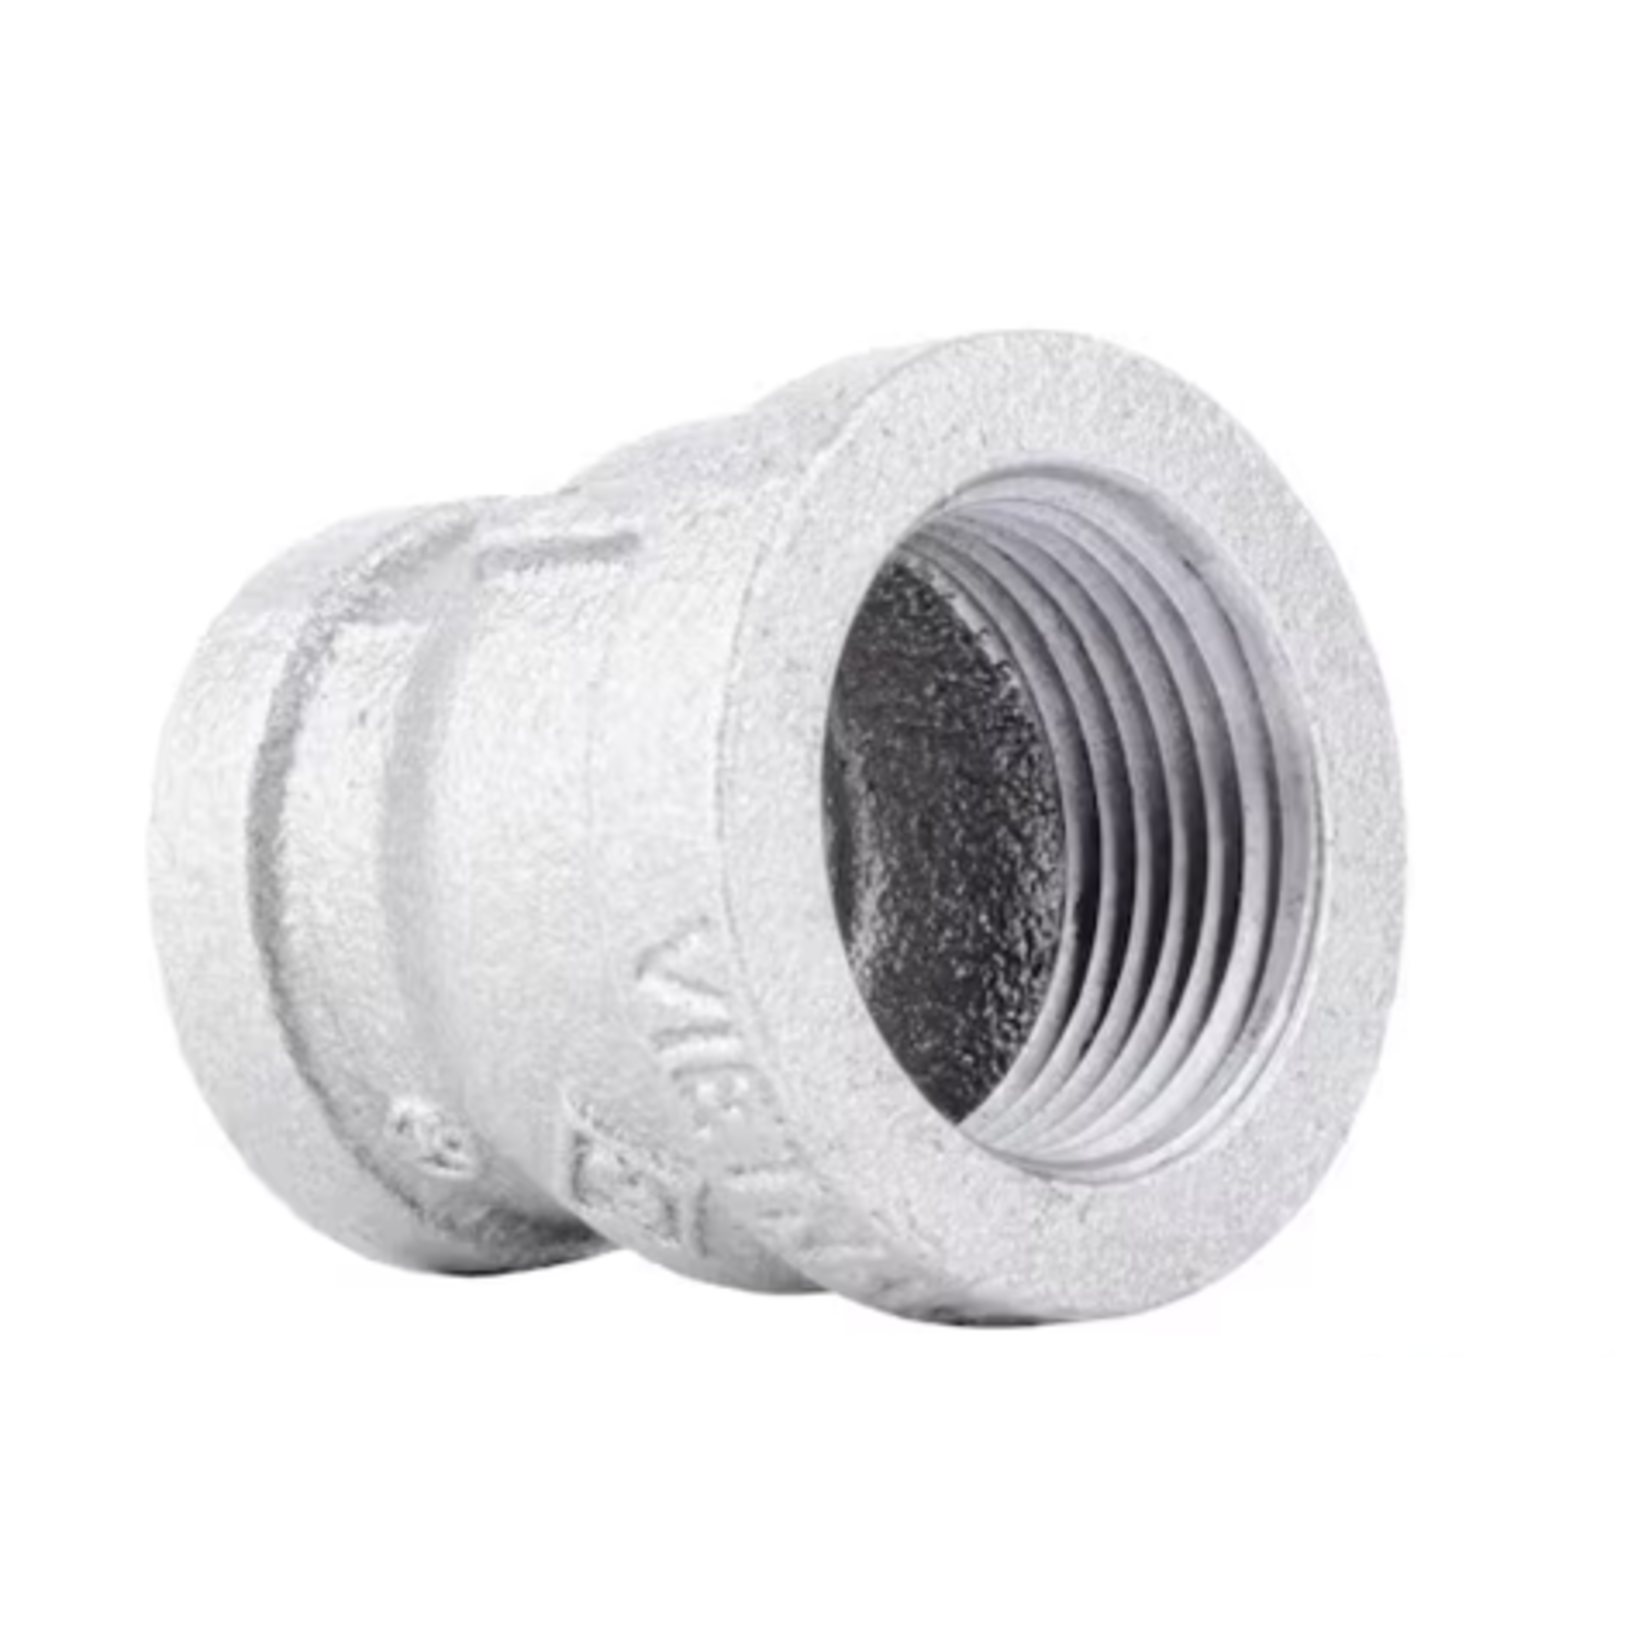 EVERFLOW 1 IN X 3/8 IN GALVANIZED REDUCER COUPLING